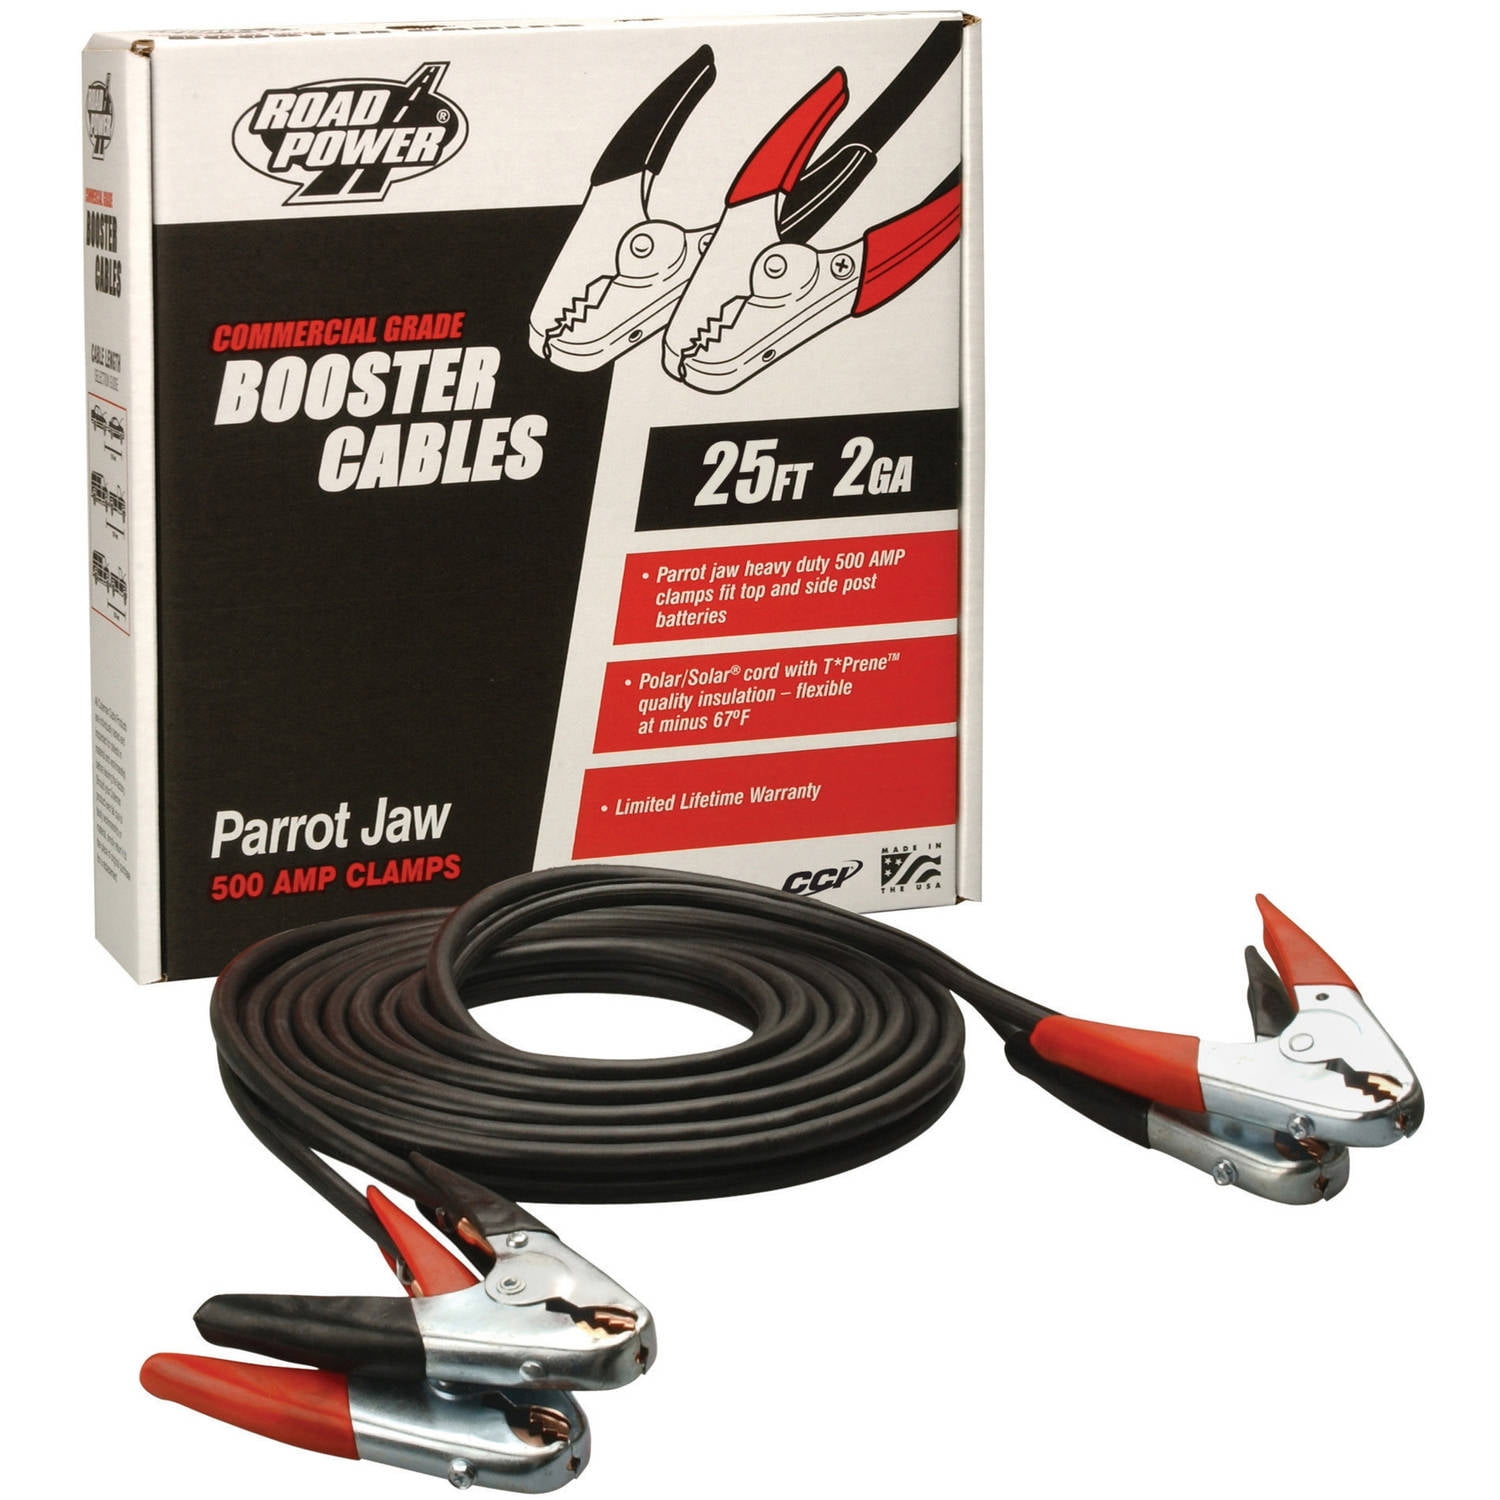 Kable Kontrol® Outdoor Rated Cable Raceway